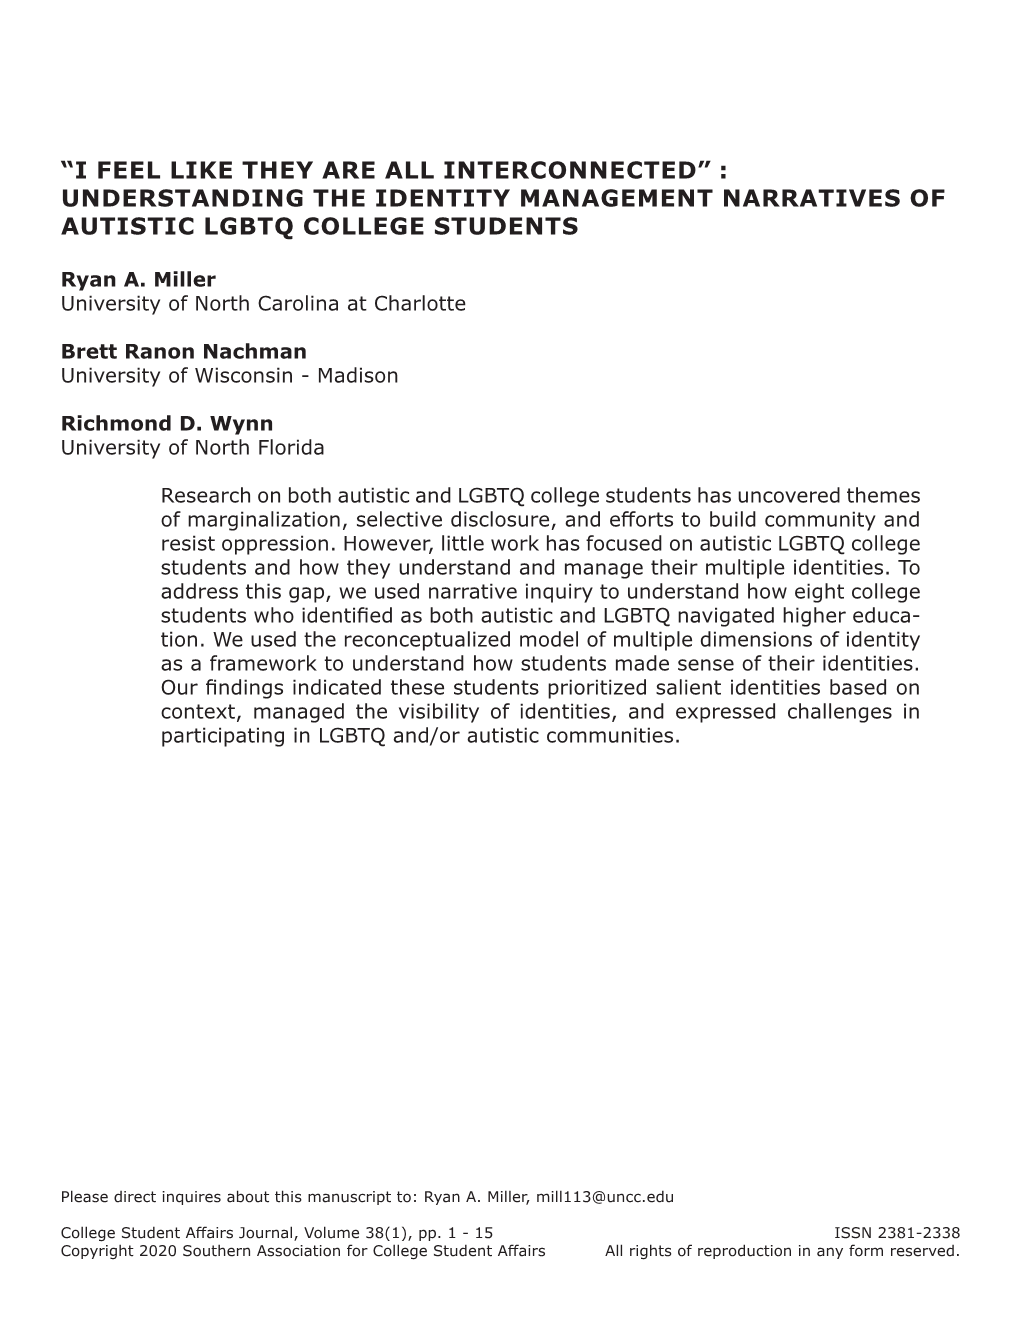 Understanding the Identity Management Narratives of Autistic Lgbtq College Students